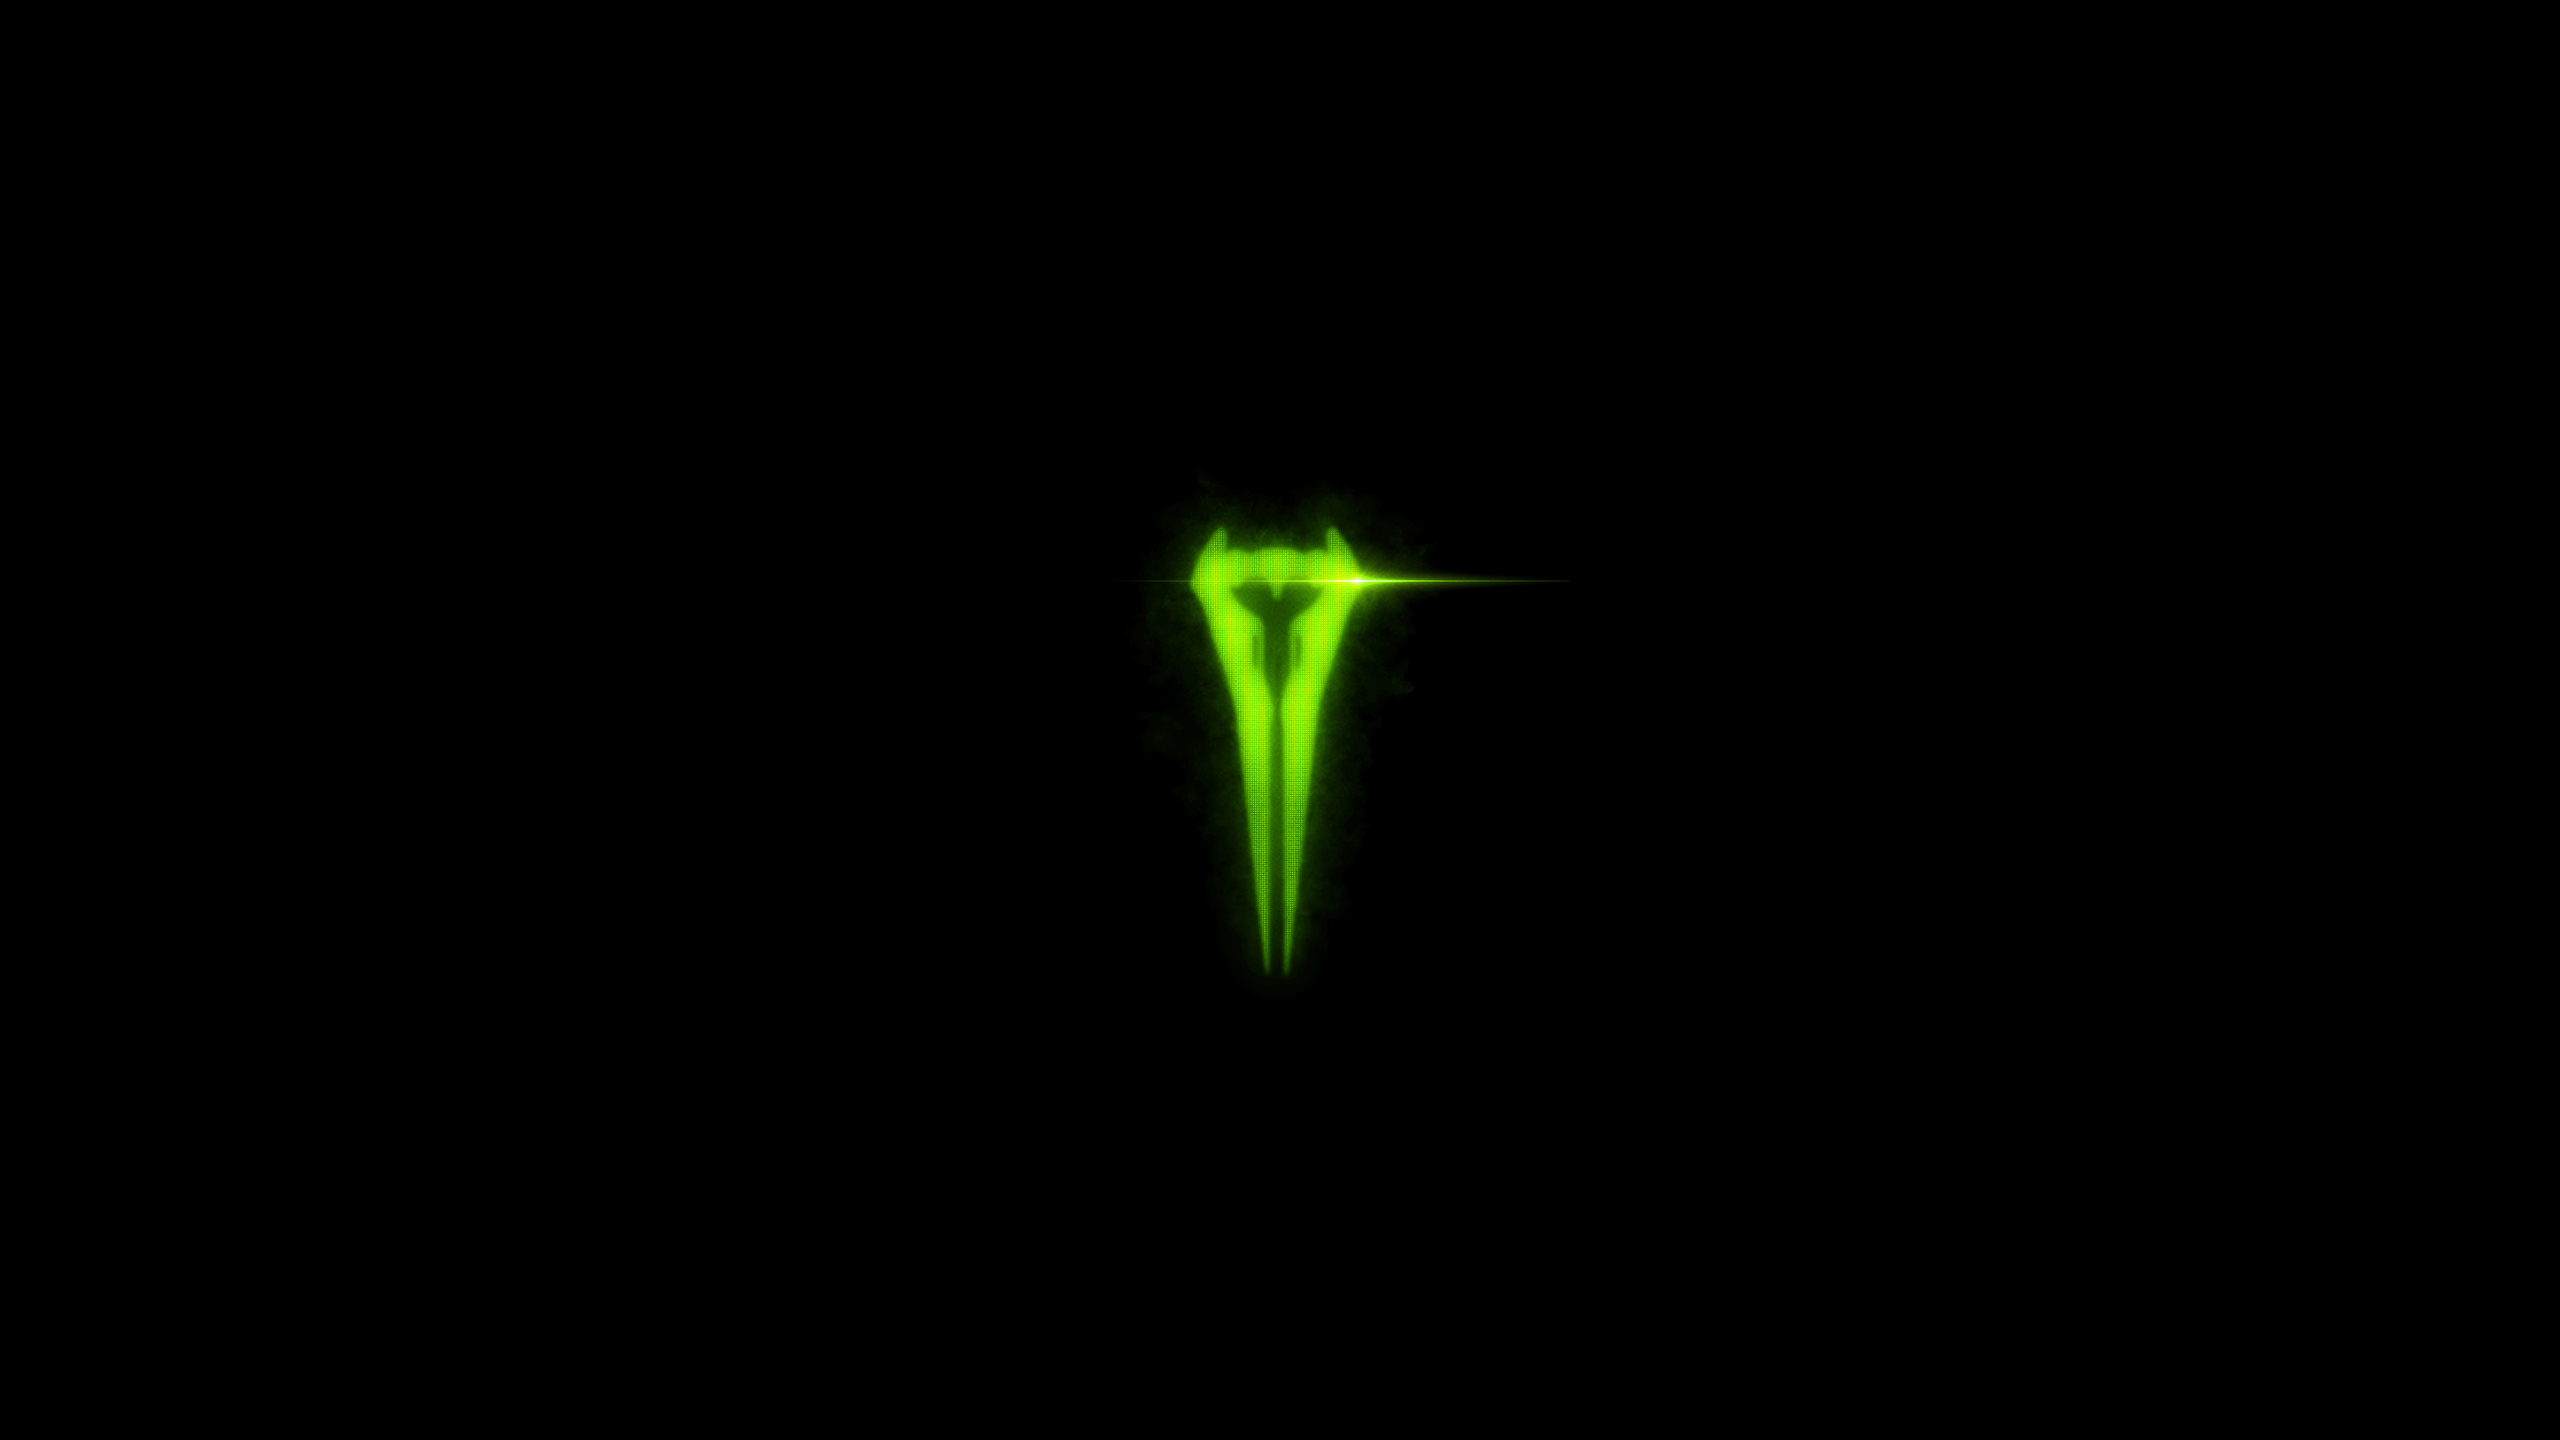 HD Xbox logo wallpaper with a glowing green design on a black background for desktop.